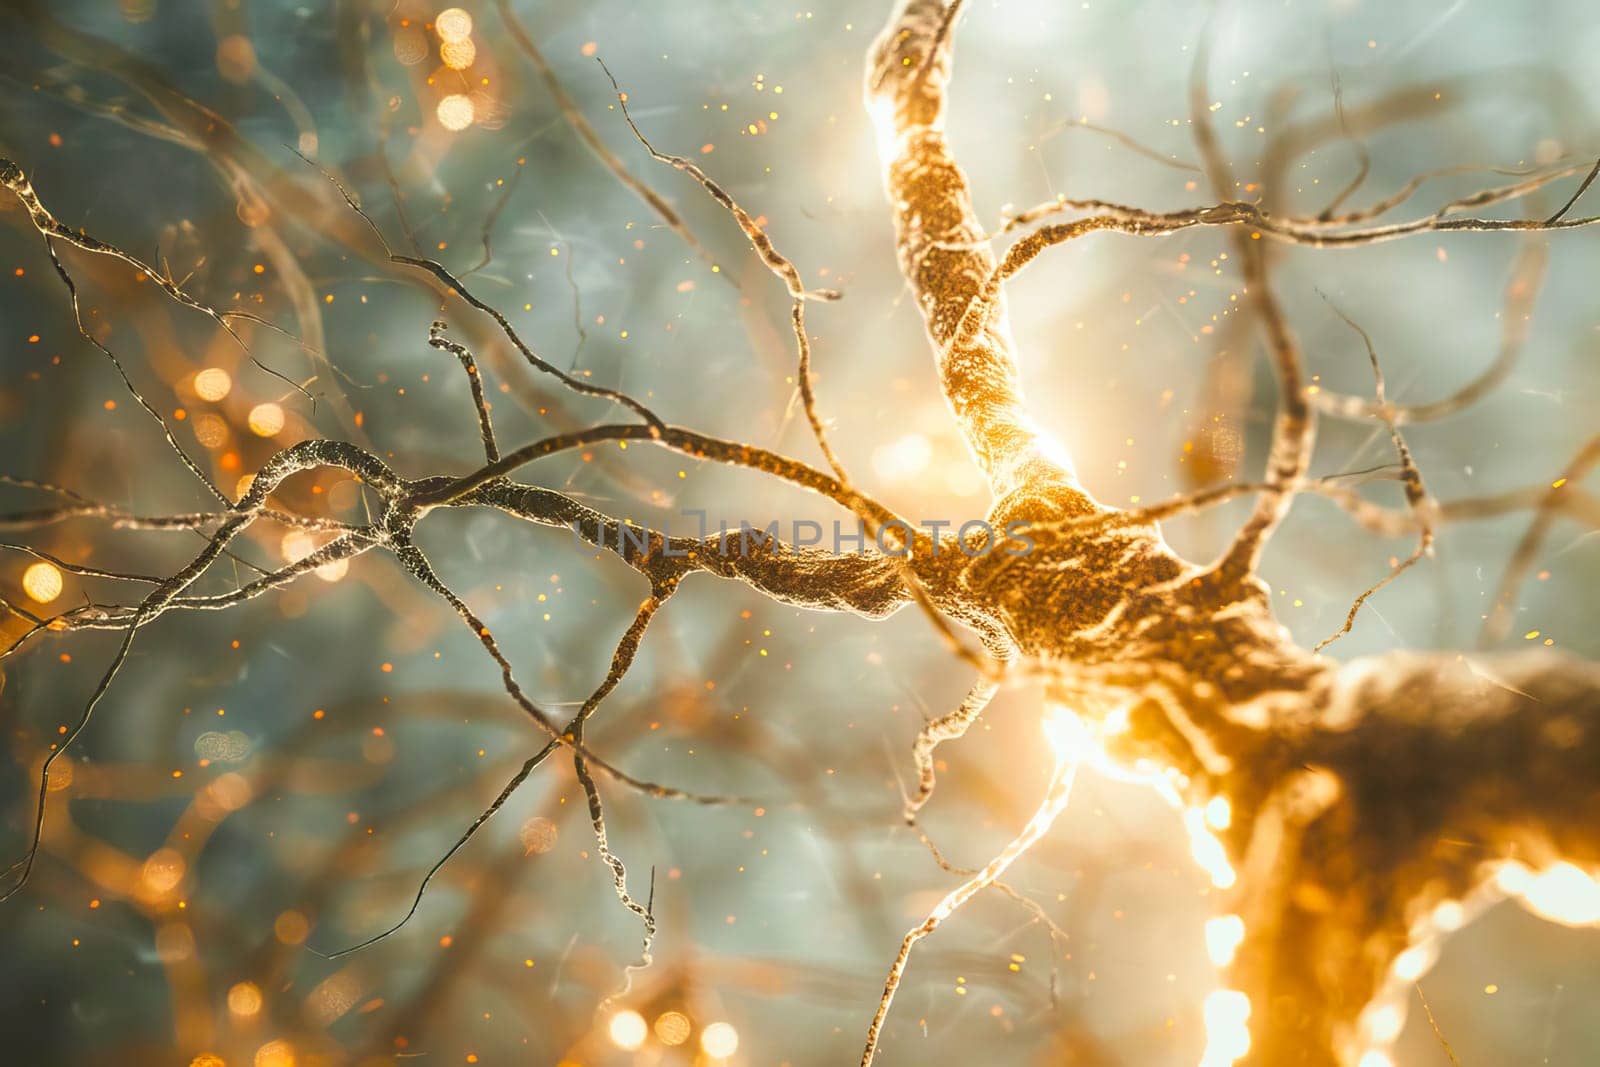 Neurons interconnected with glowing synapses in a close-up view by vladimka